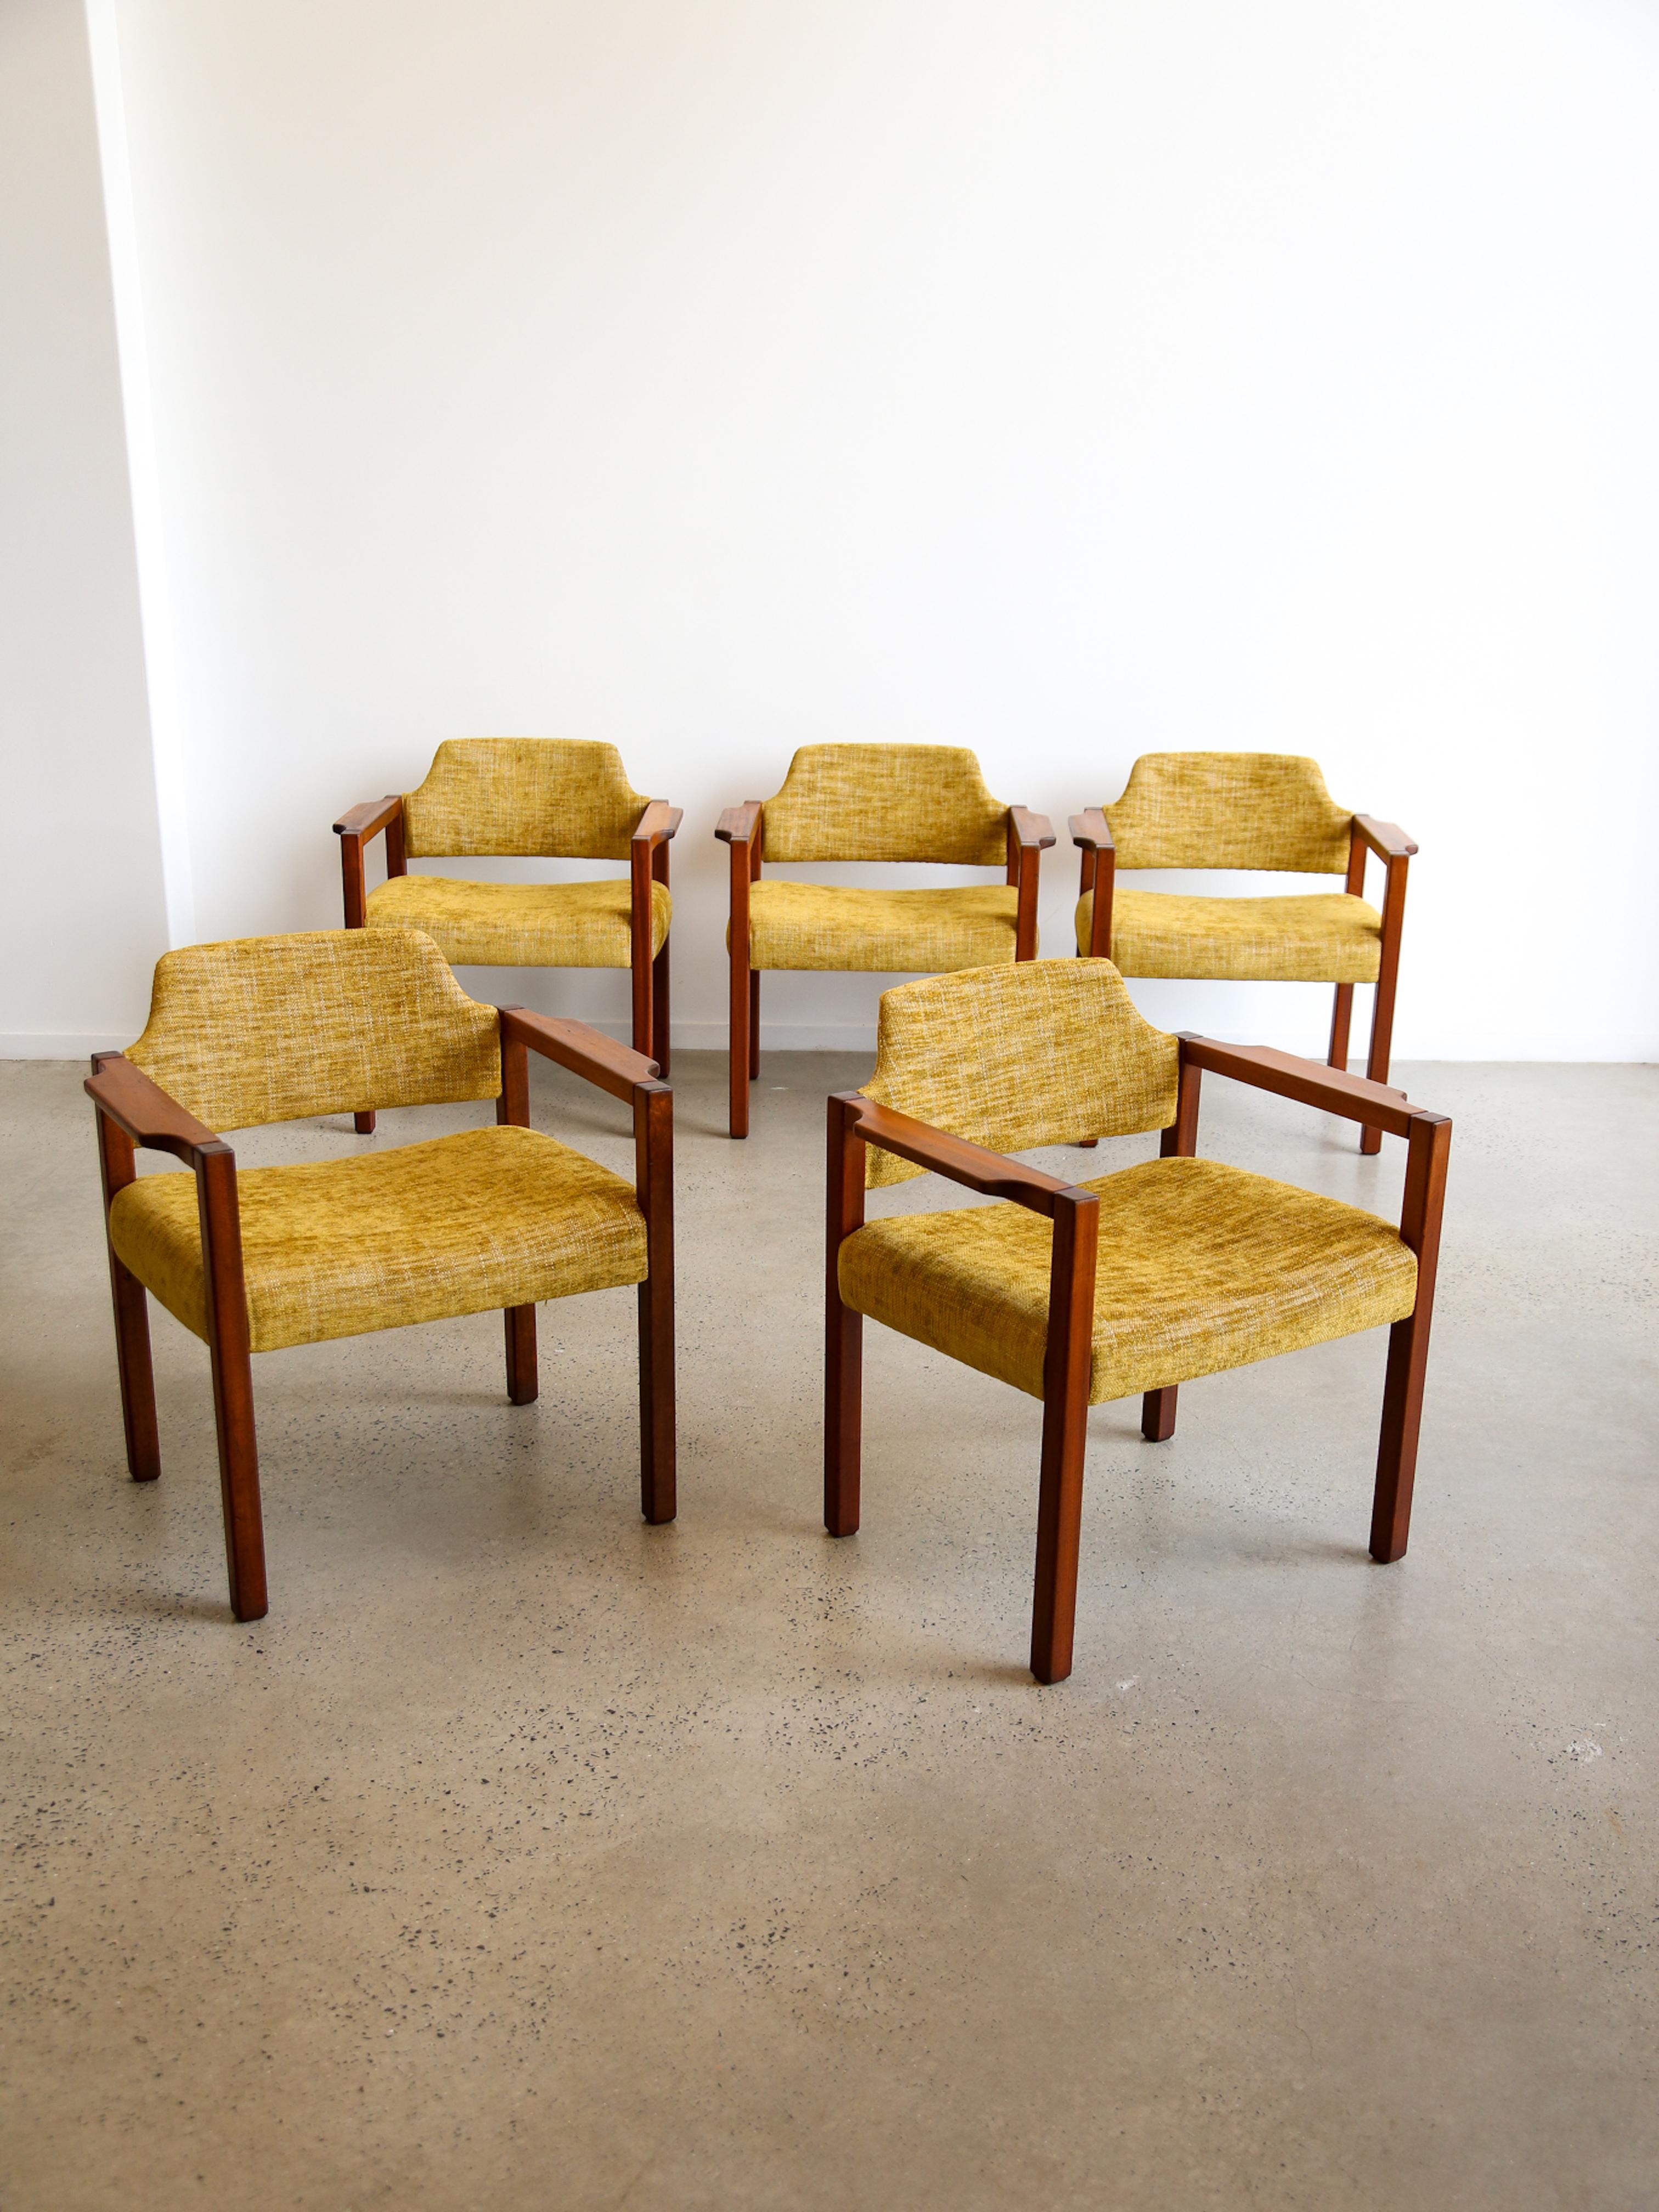 Set of six beech and fabric armchairs by Umberto Brandigi for Poltronova. 

Poltronova is an Italian design company known for its contributions to the world of modern and contemporary furniture and interior design. Founded in 1957 by Sergio